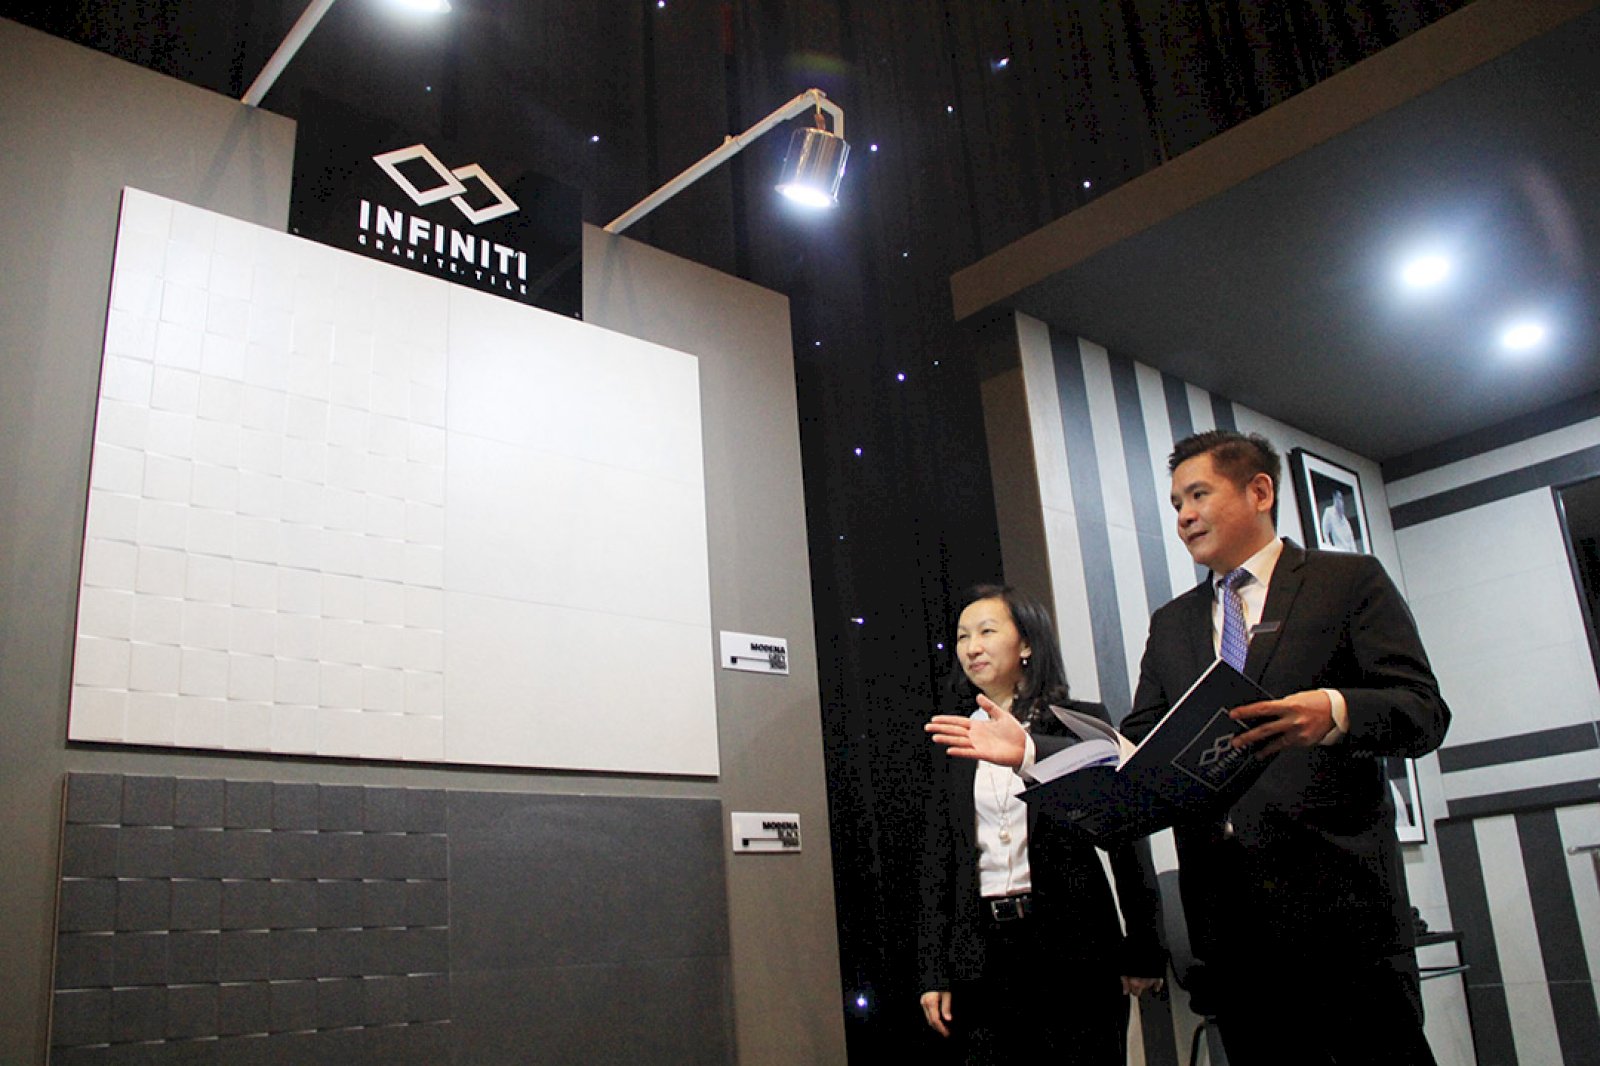 Infiniti Granite Tile is here to answer market demand